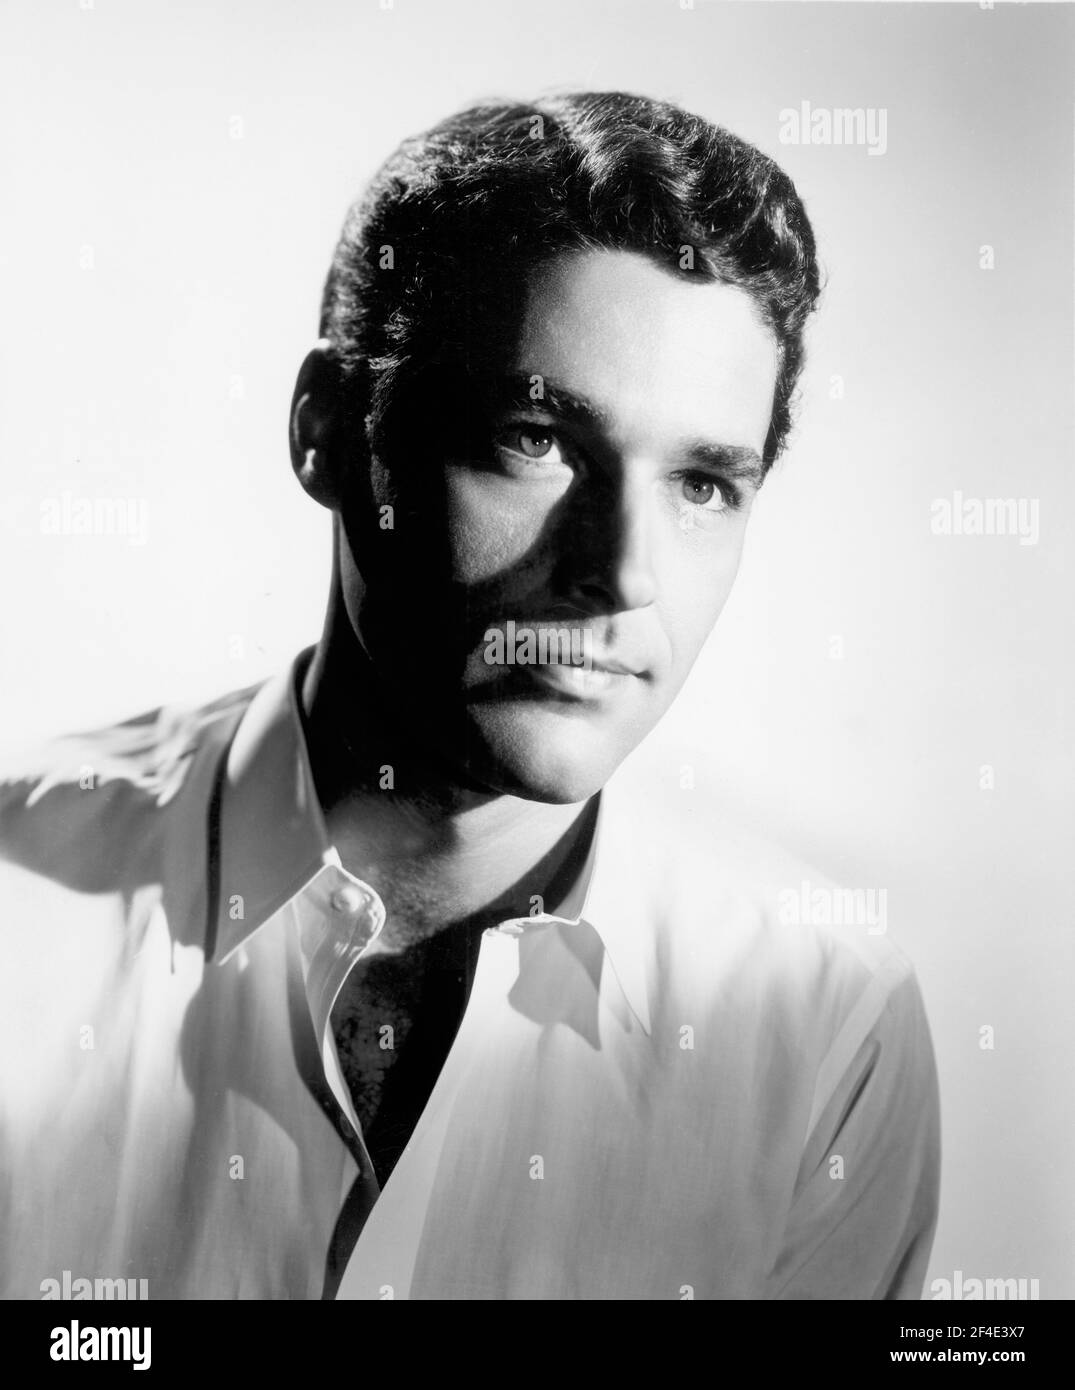 Kerwin Mathews, Head and Shoulders Publicity Portrait for the film, 'Tarawa beachhead', Columbia Pictures, 1958 Banque D'Images